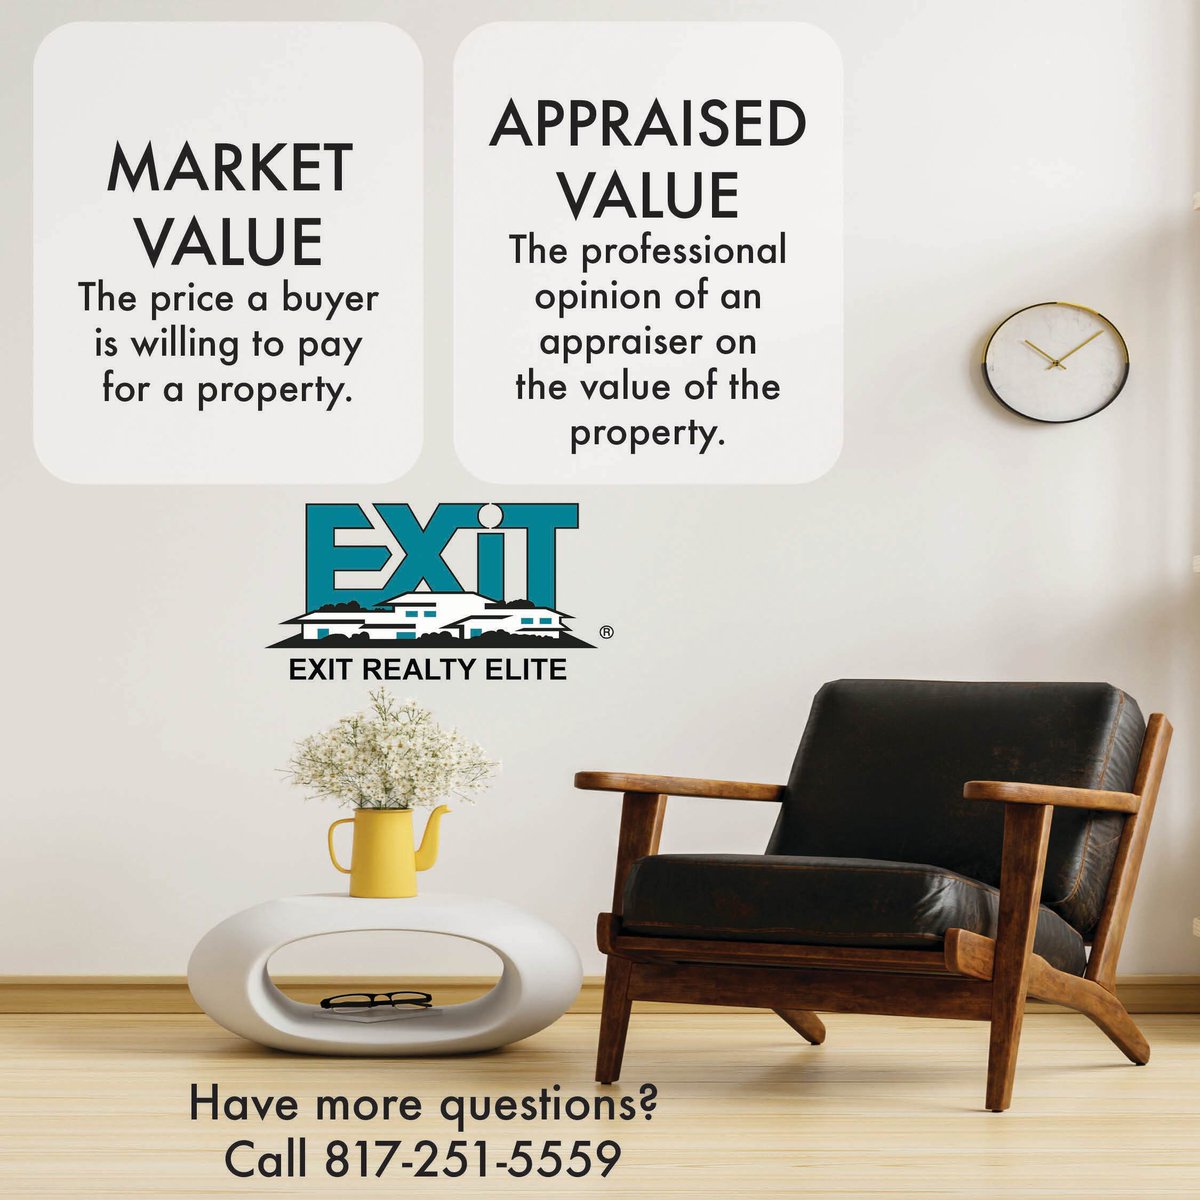 Questions about home values?
Call us, we can explain!

#LOVEXIT #ImSold #ThinkSmartThinkEXIT #RealEstateReinvented #ListwithEXIT #DFWMetroplex #buyahome #sellahome #EXITRealtyElite #RealEstateCareers #TexasRealEstate